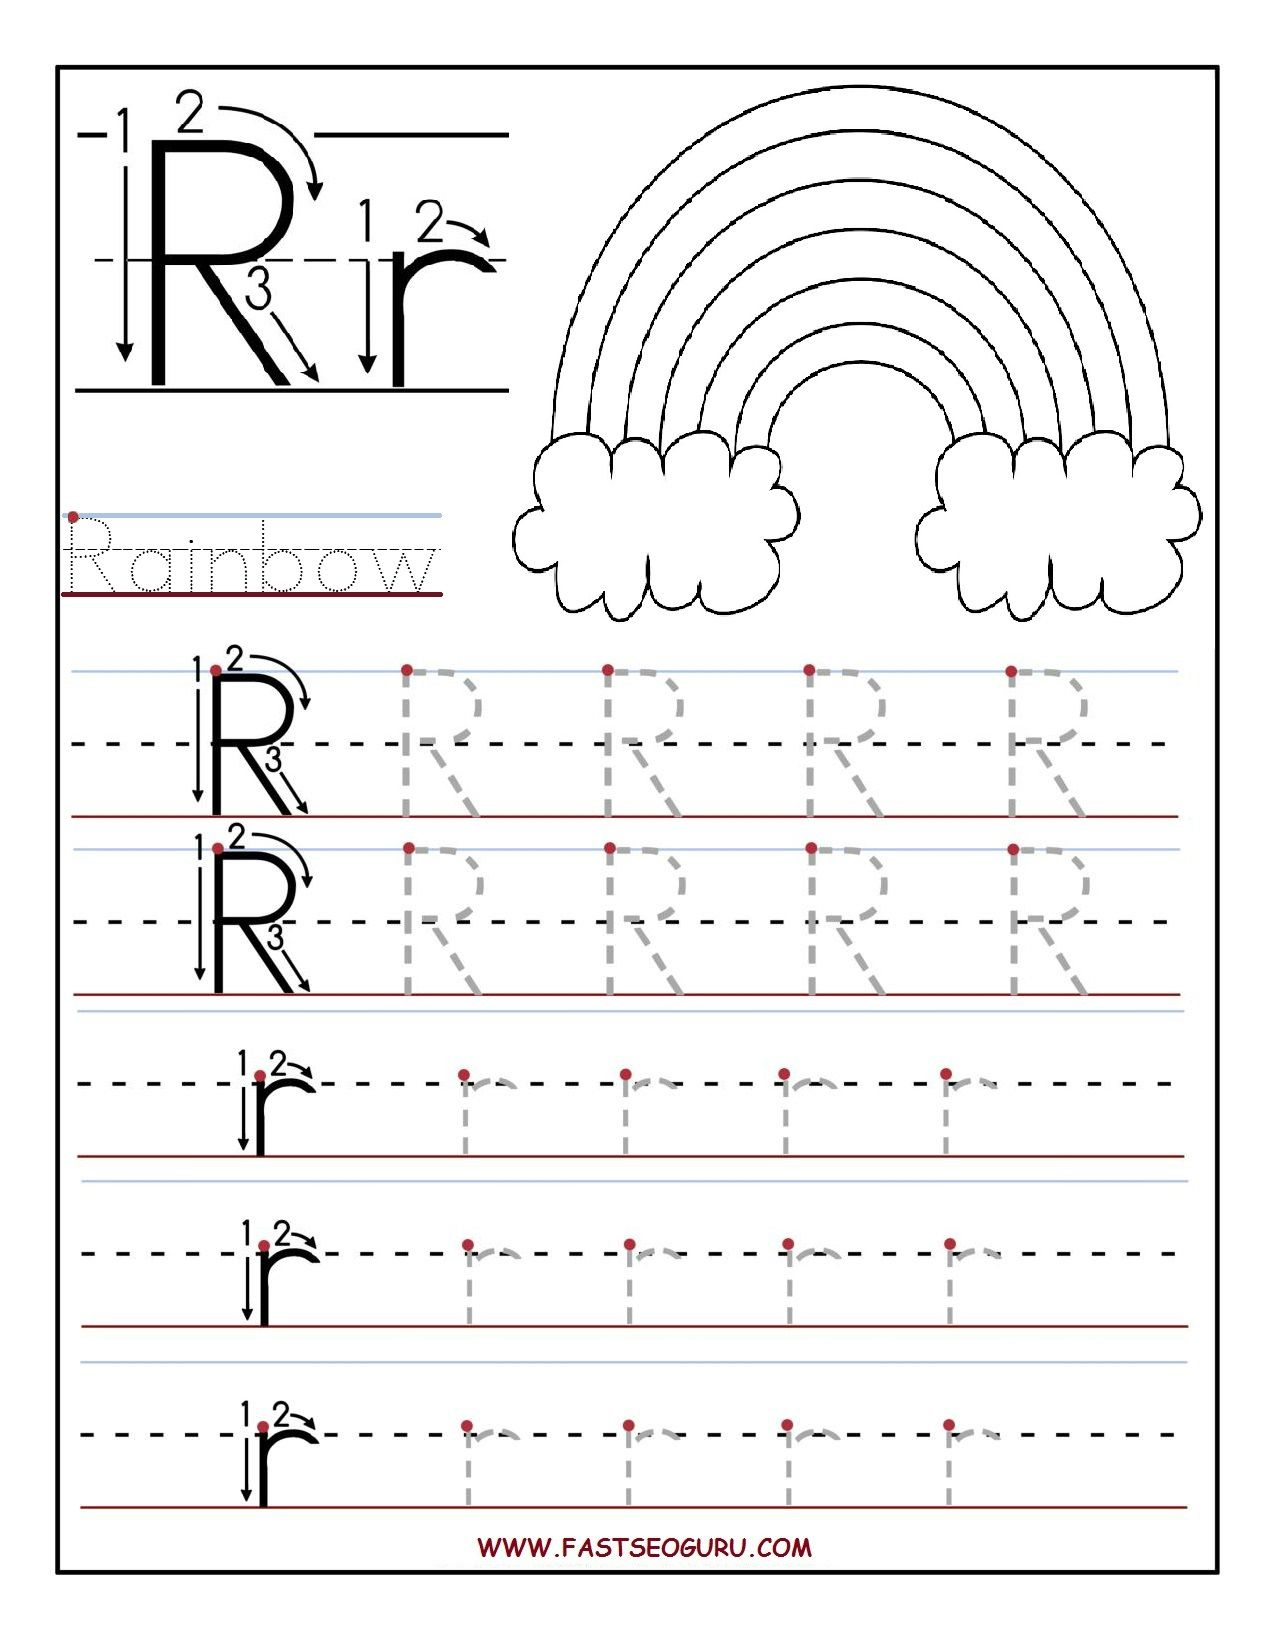 Printable Letter R Tracing Worksheets For Preschool for Letter R Tracing Sheets